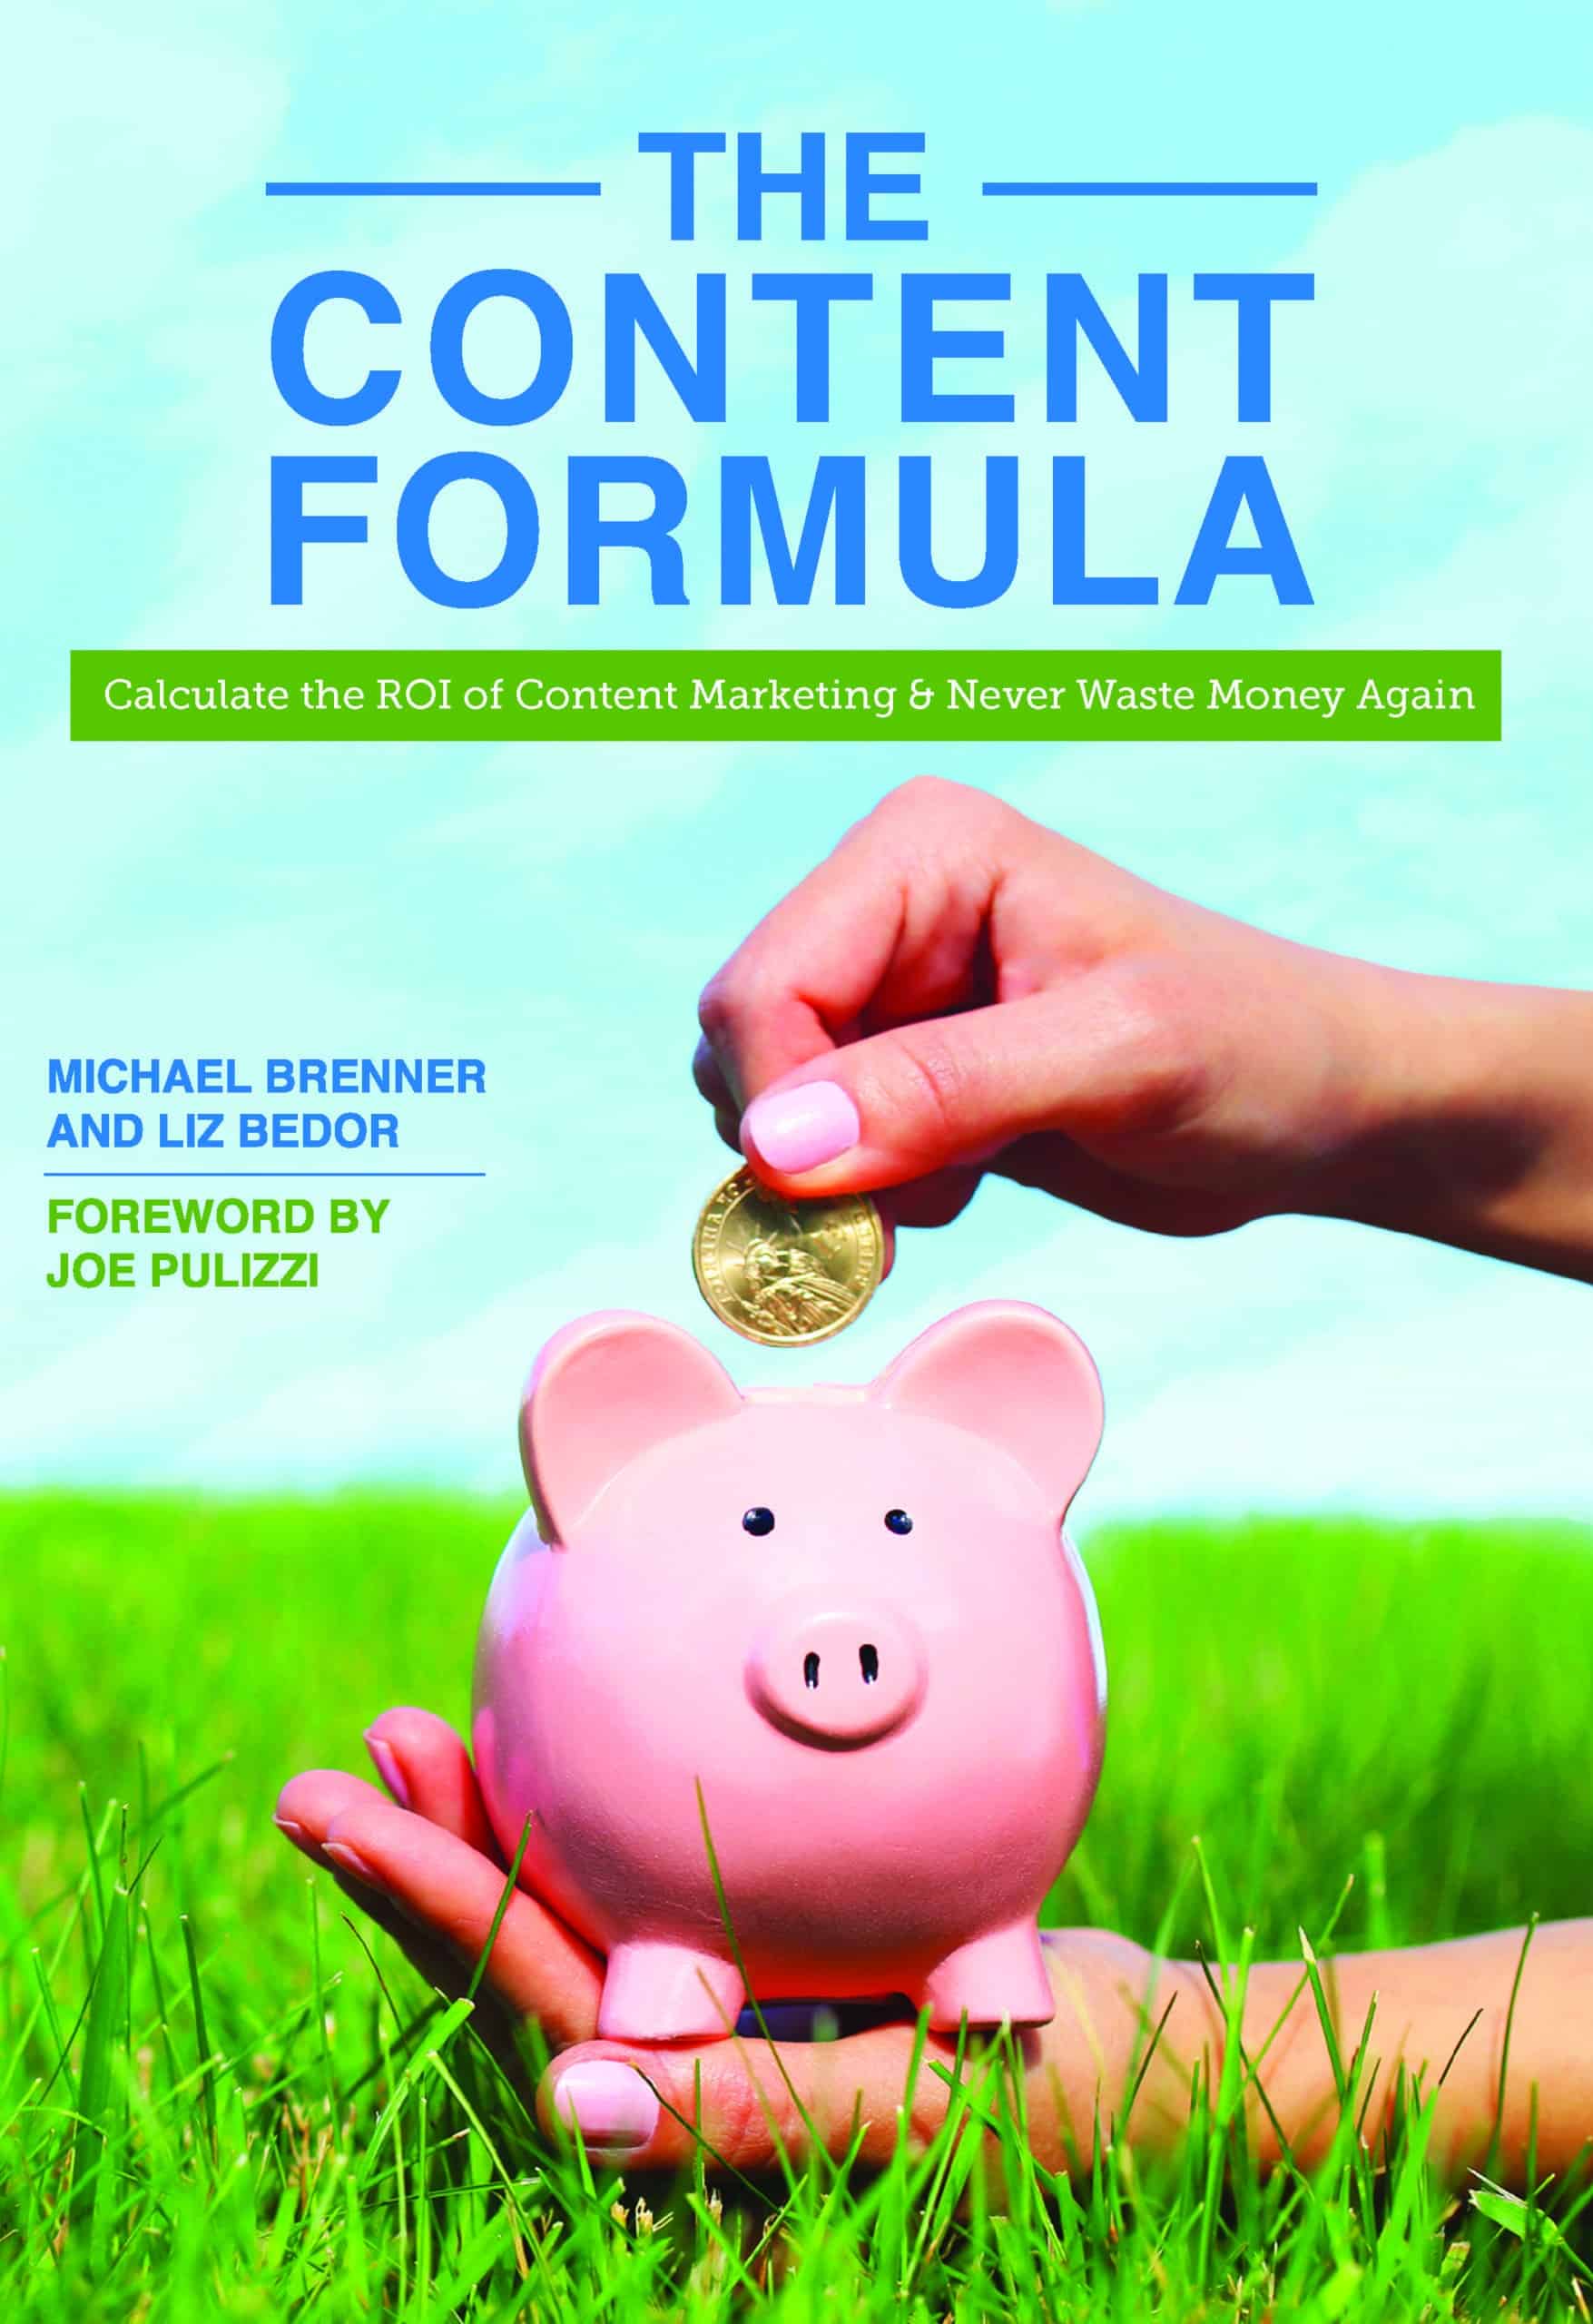 Announcing The Launch Of ‘The Content Formula’ Book